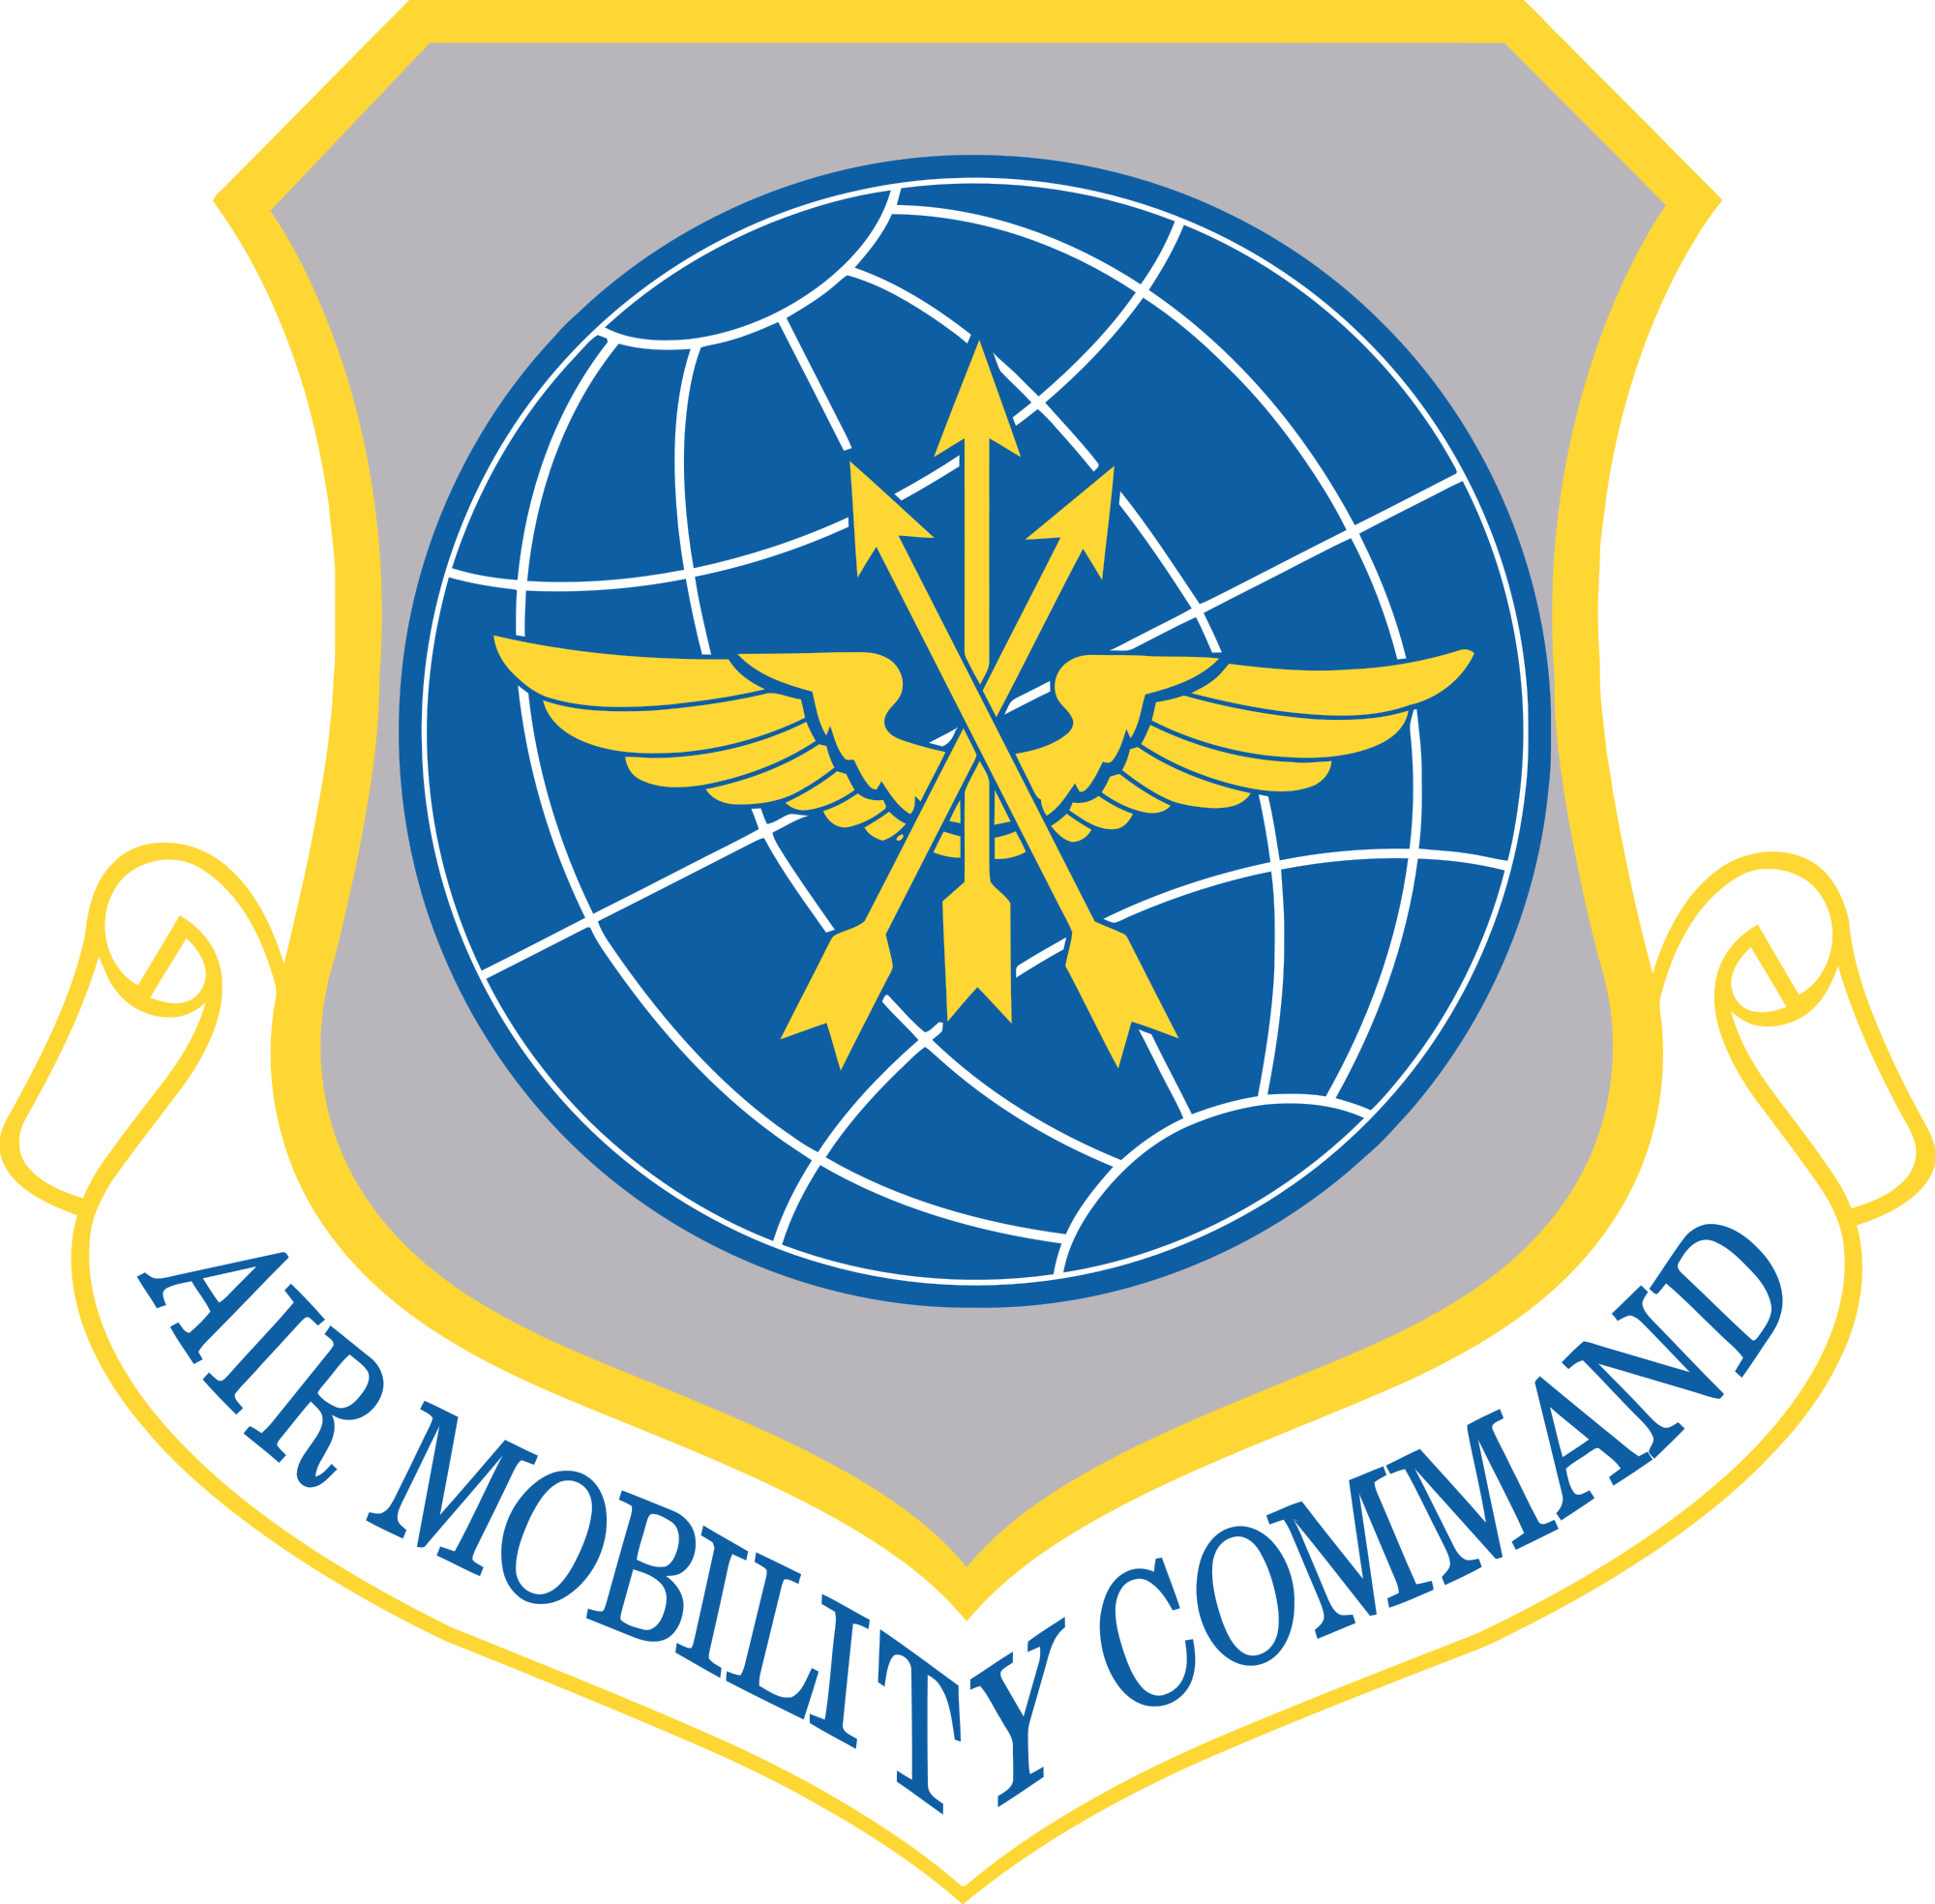 United States Air Force Expeditionary Center Emblem - Air Mobility Command Patch (2000x1968)